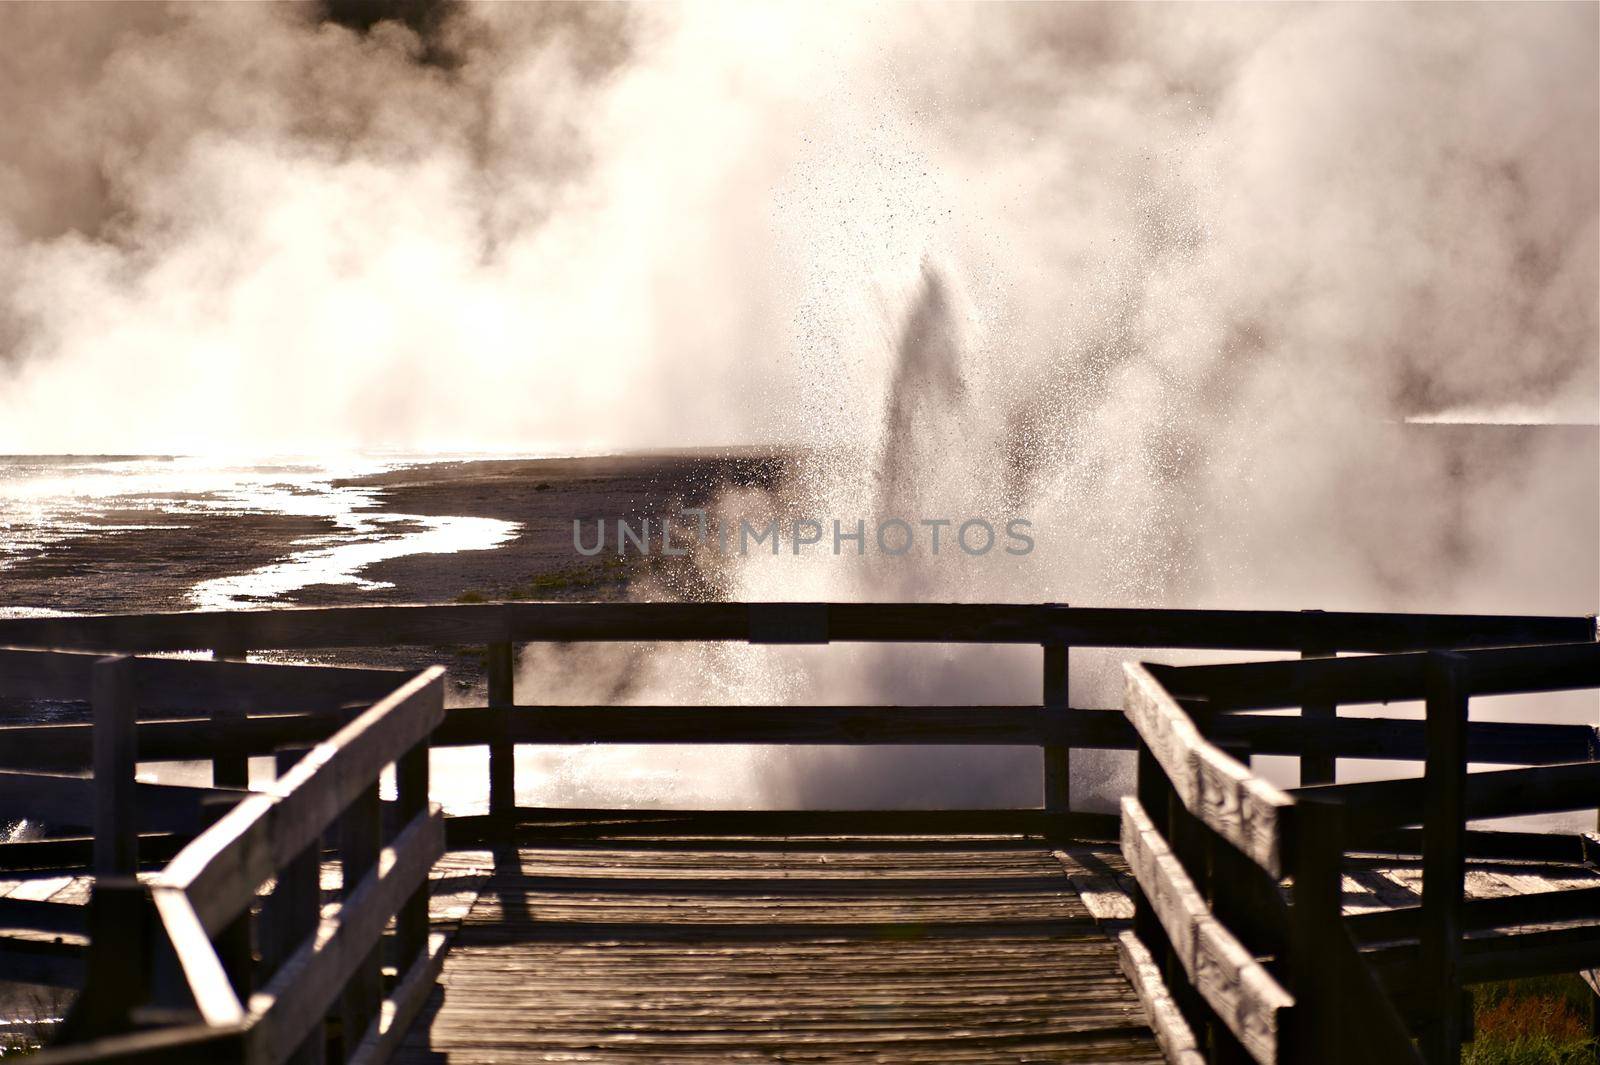 Black Sand Basin Yellowstone National Park. Erupting Geyser in Front of View Point. U.S. National Parks Photo Collection by welcomia